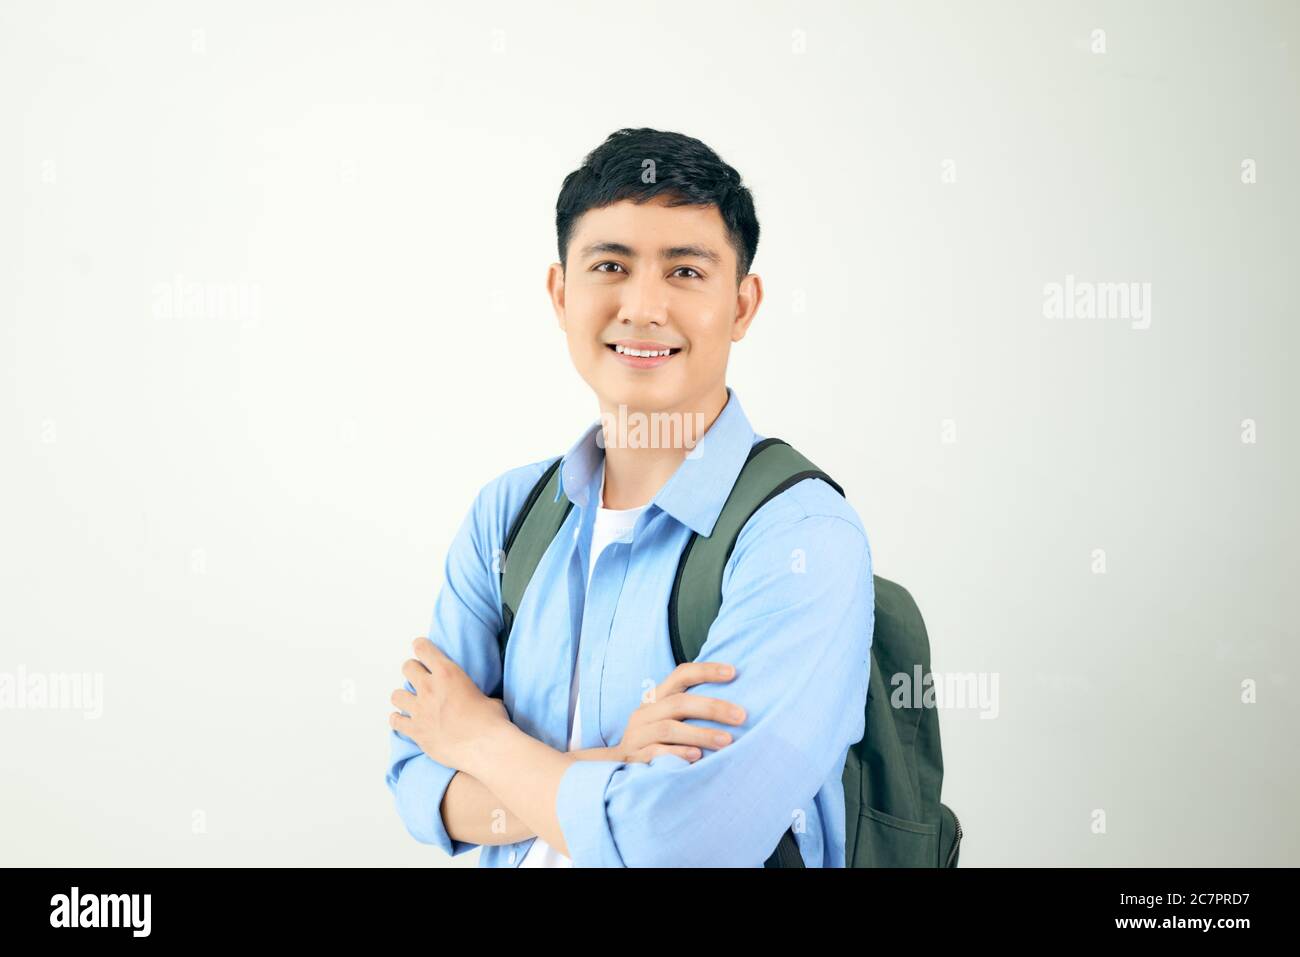 Handsome and friendly face man self-confident positive expression with crossed arms on white background Stock Photo